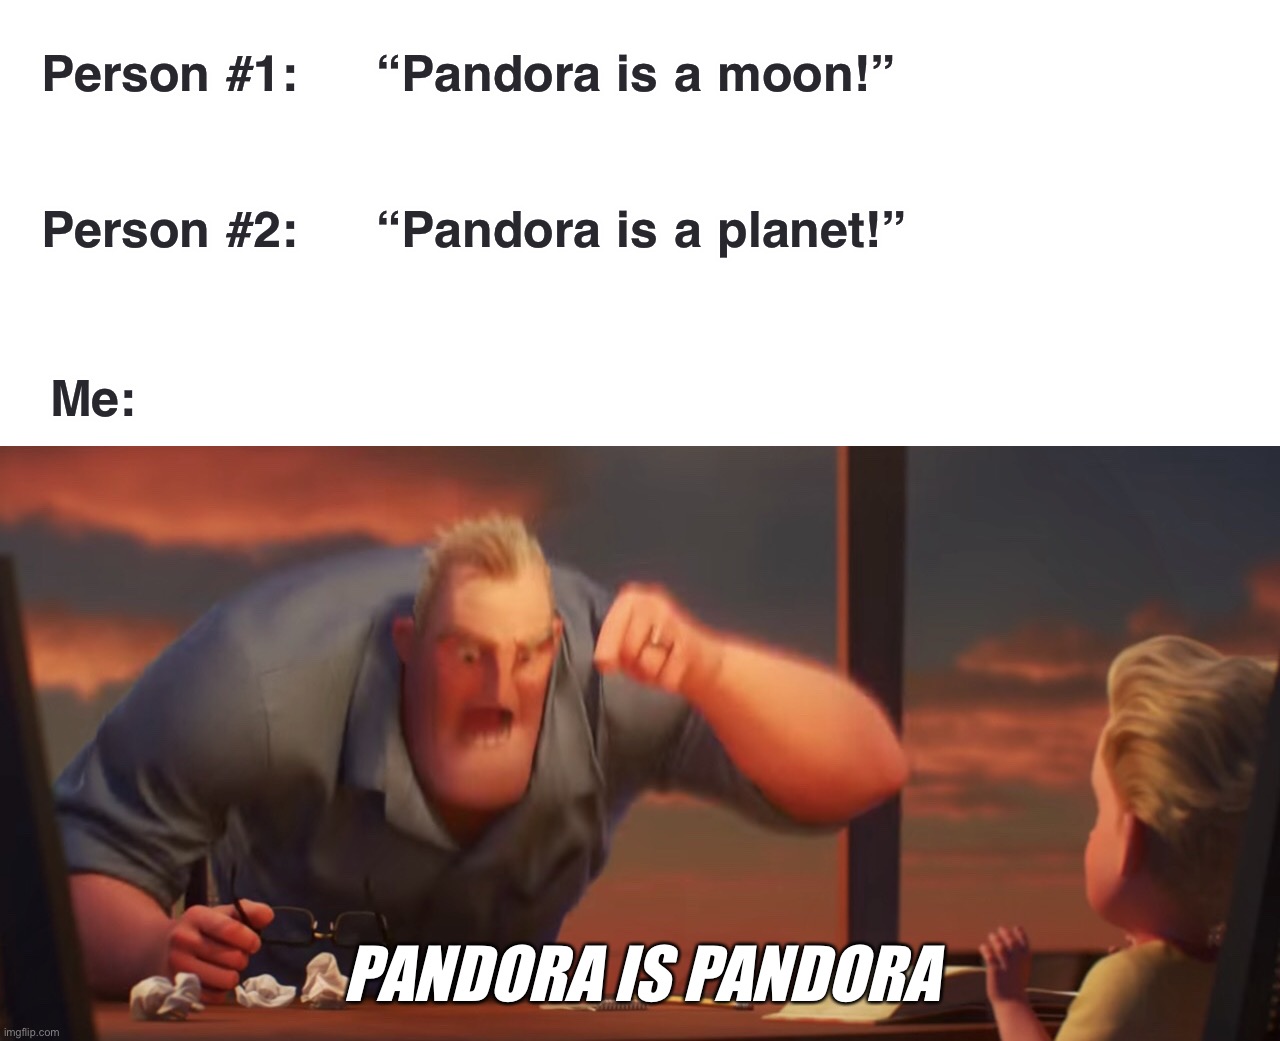 Person #1:     “Pandora is a moon!”; Person #2:     “Pandora is a planet!”; Me:; PANDORA IS PANDORA | image tagged in avatar,memes,pandora,math is math,science,science fiction | made w/ Imgflip meme maker